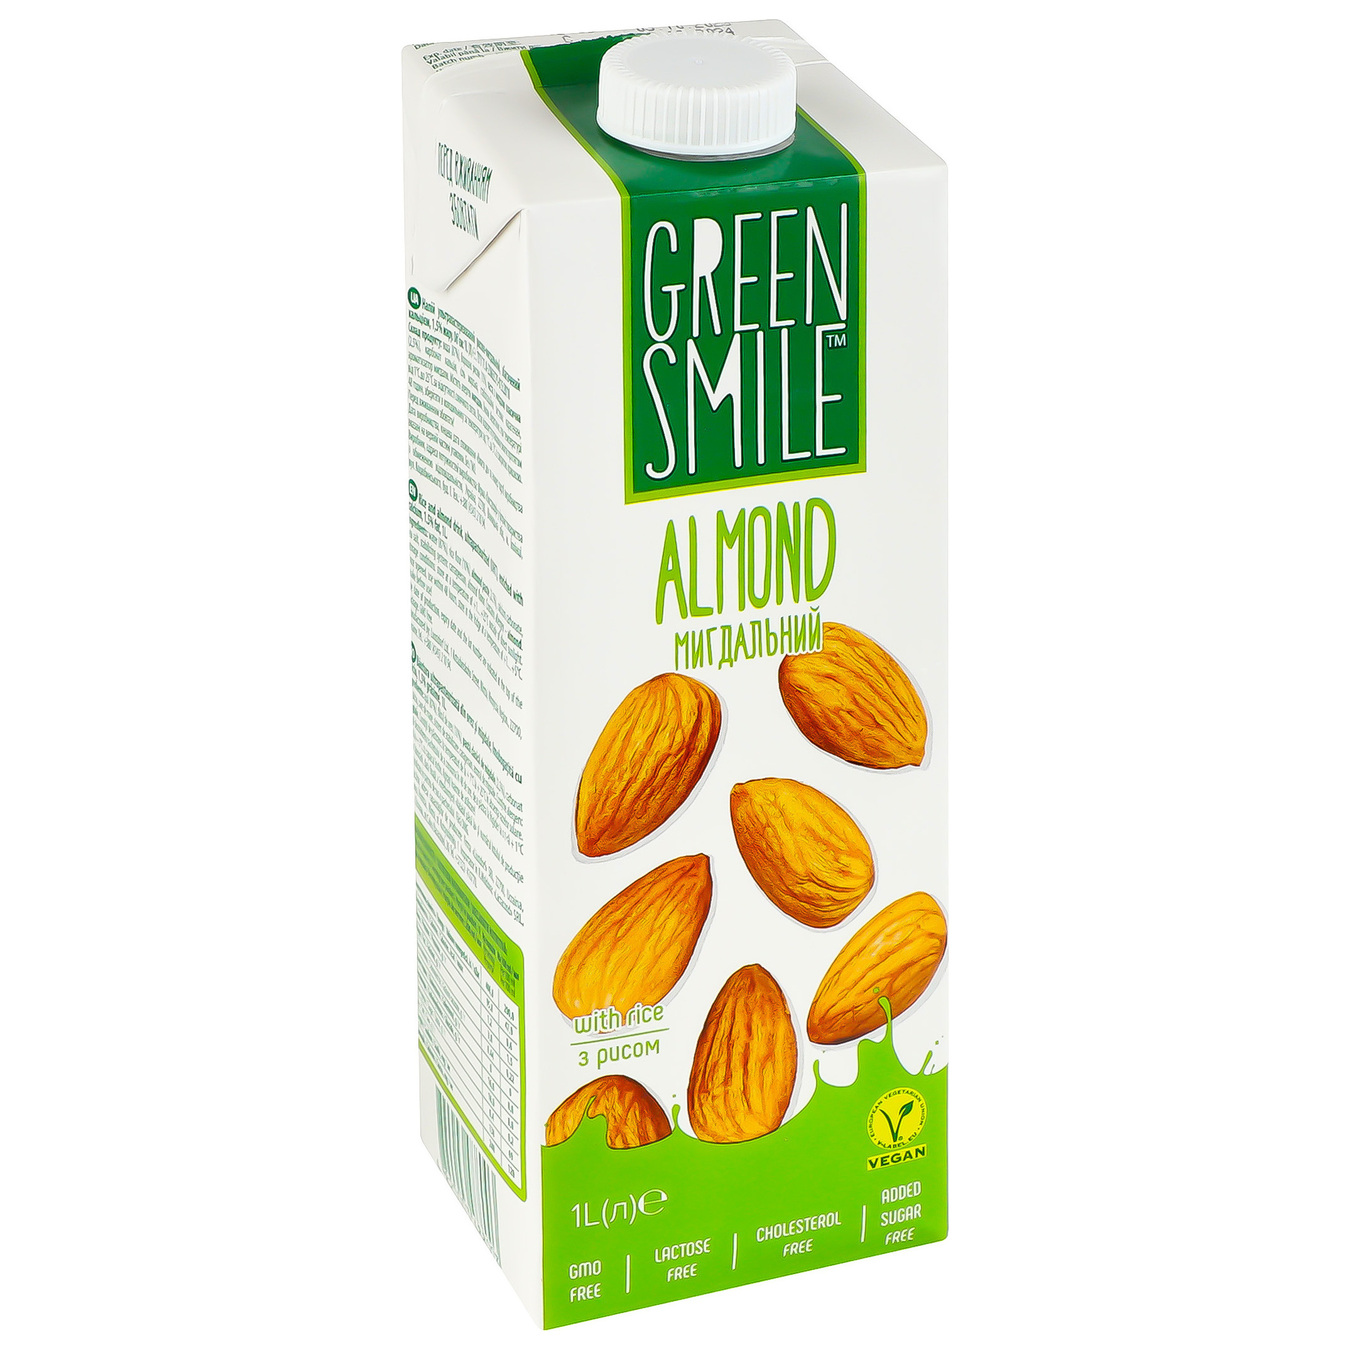 Green Smile Rice-almond drink Almond ultra-pasteurized enriched with calcium 1.5% 1l 3